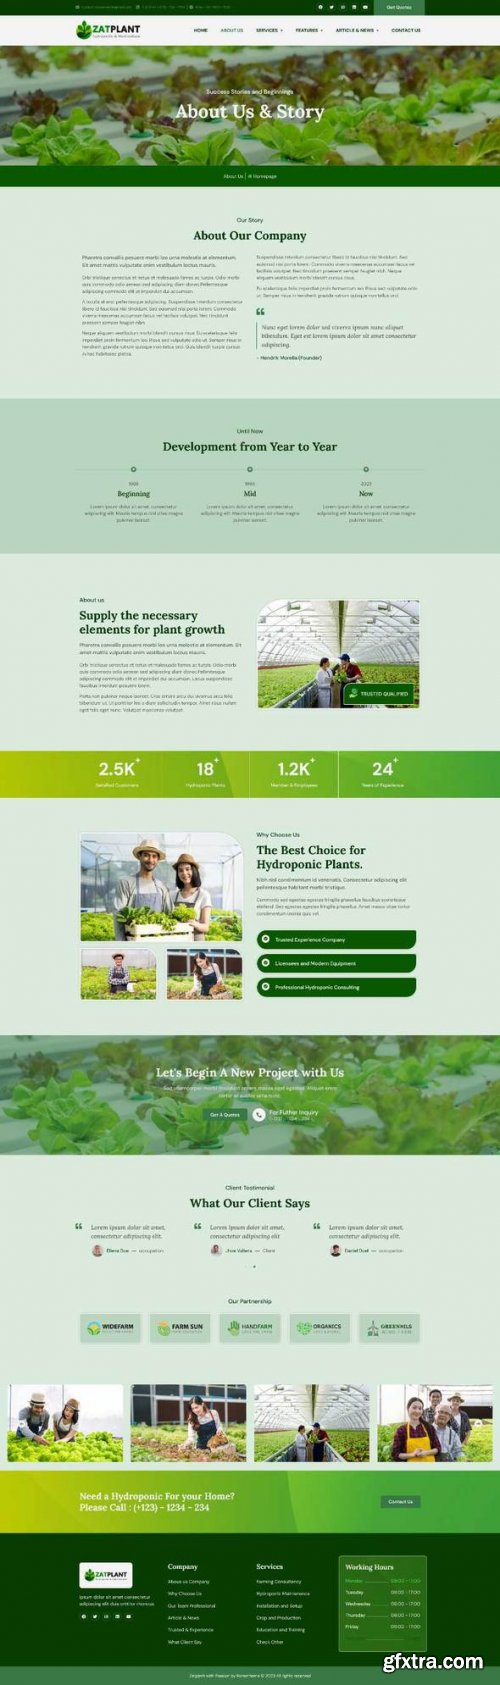 Themeforest - Zatplant - Hydroponic Garden and Horticulture Elementor Template Kit 47518471 v1.0.0 - Nulled